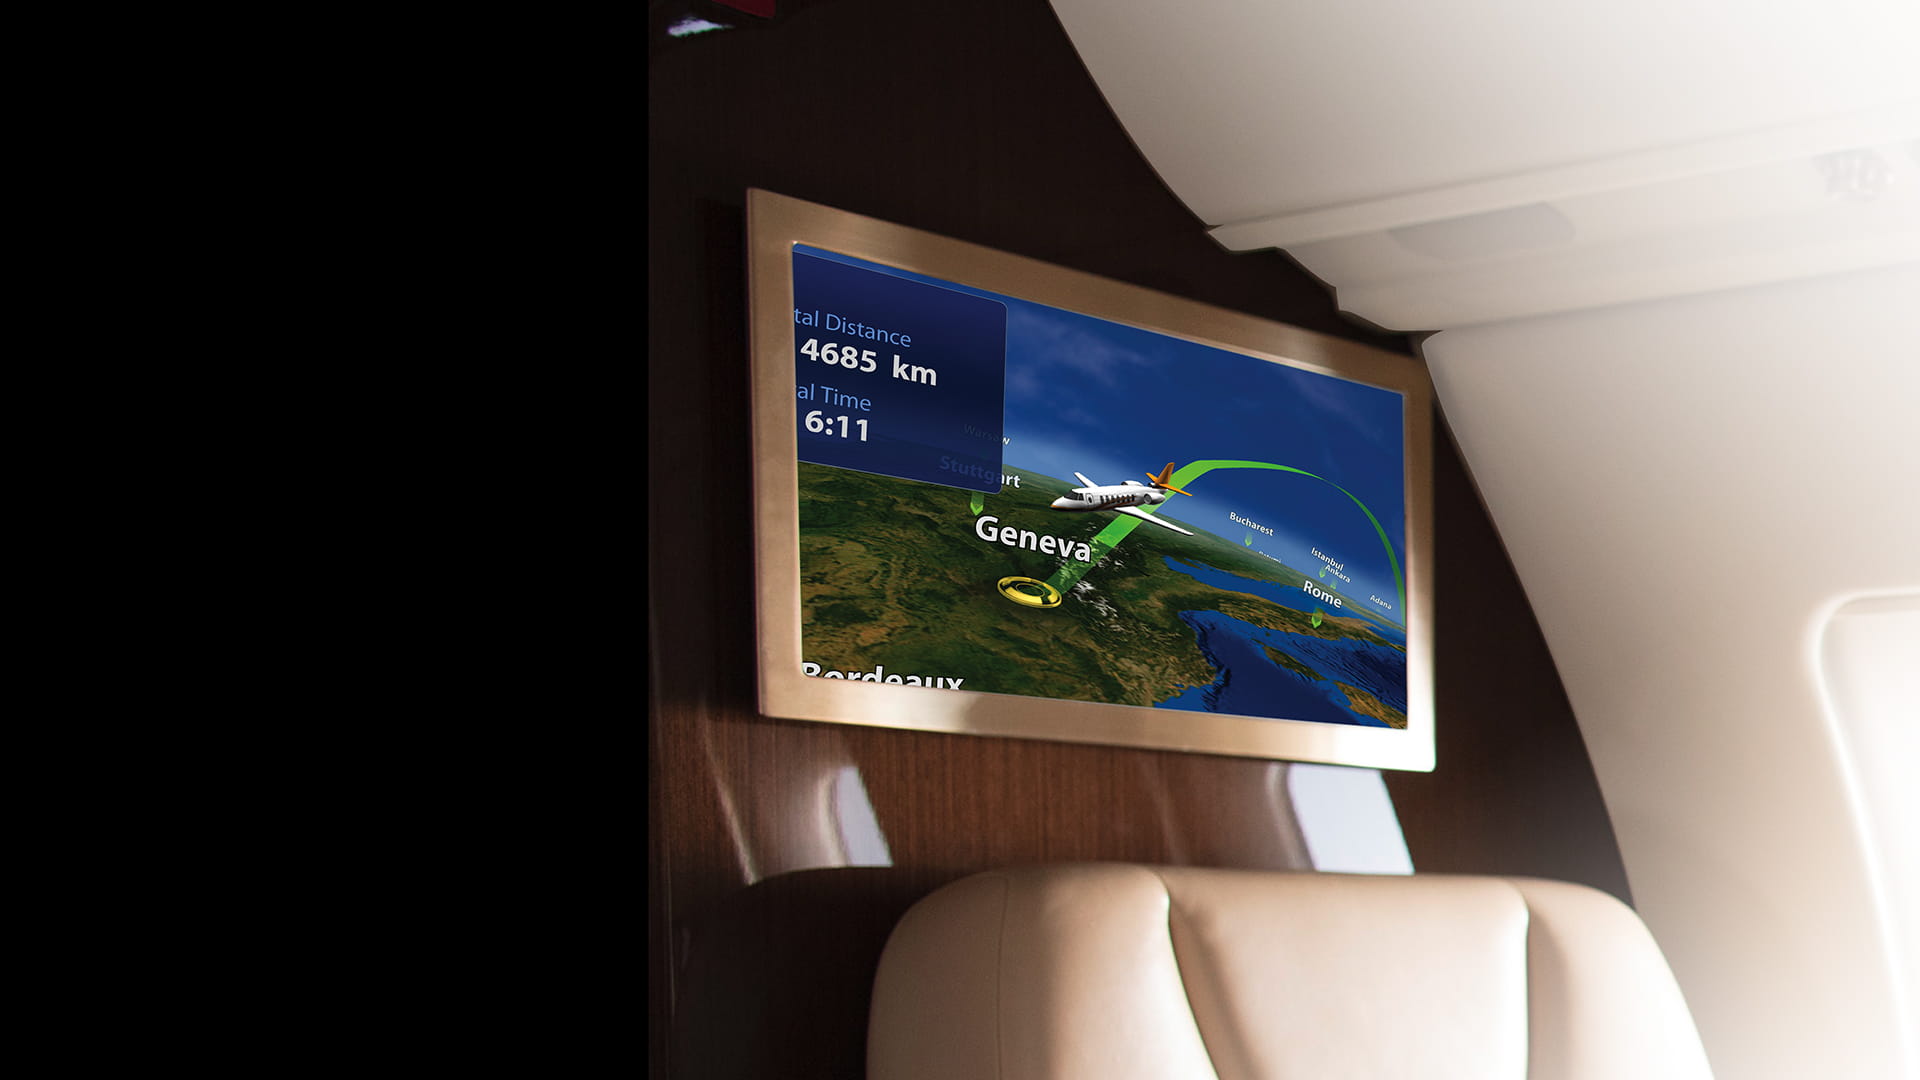 Television on an aircraft featuring Collins Aerospace's Airshow Moving Maps